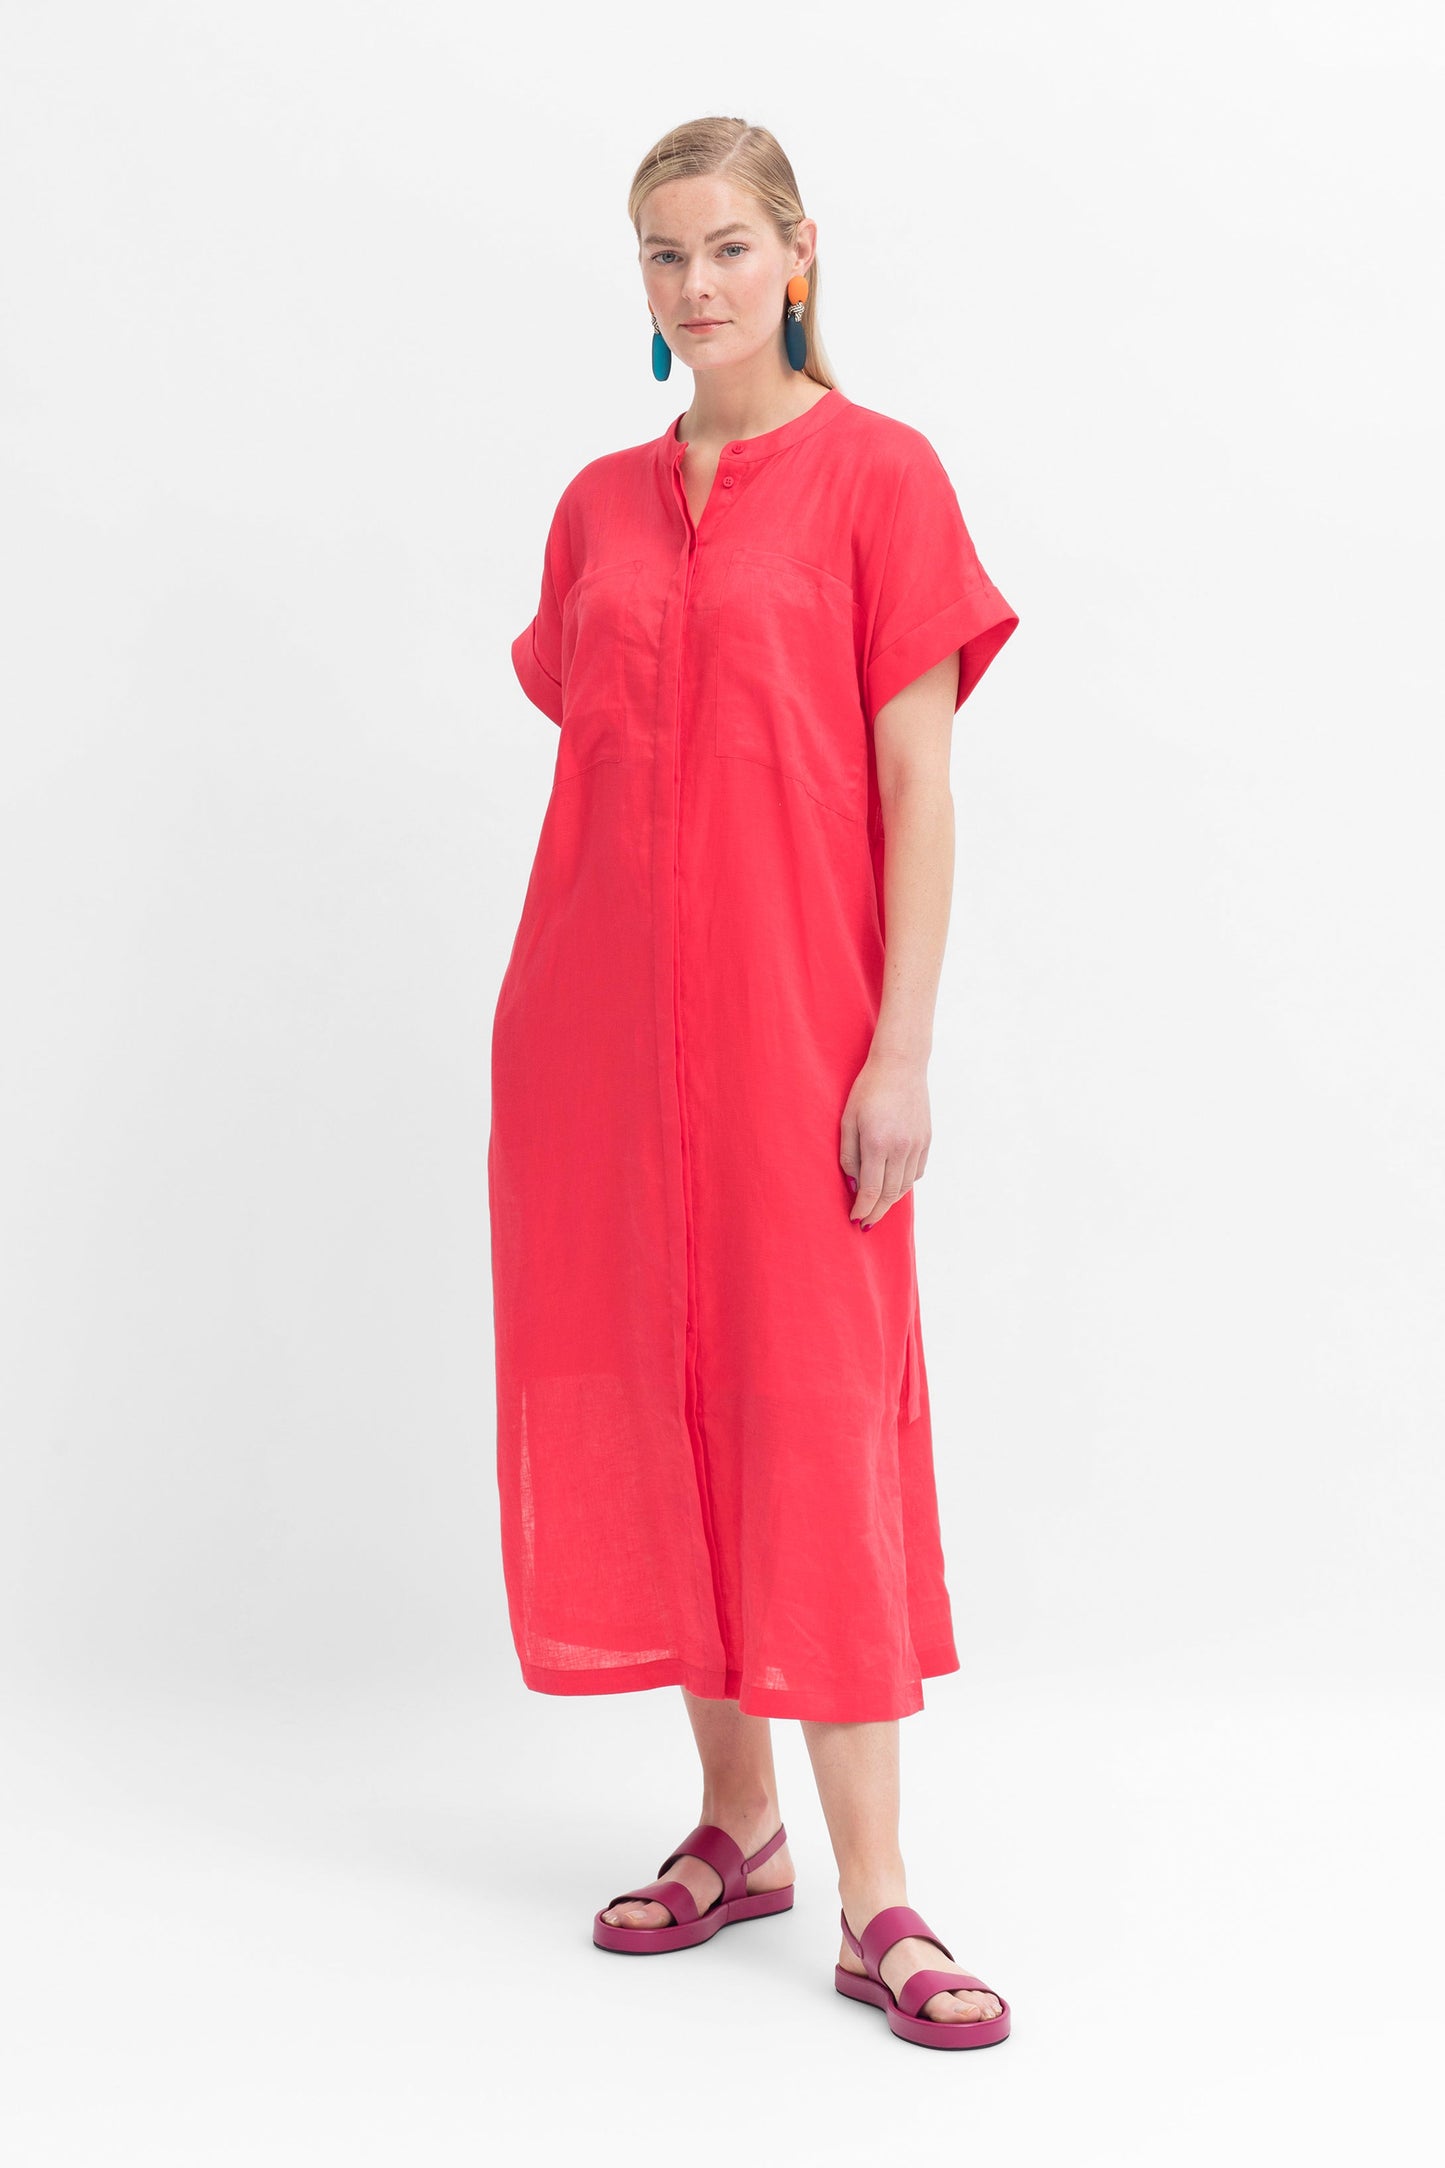 Mies French Linen Collarless Shirt Dress with Tie and Slip Model Front untied | CORAL PINK